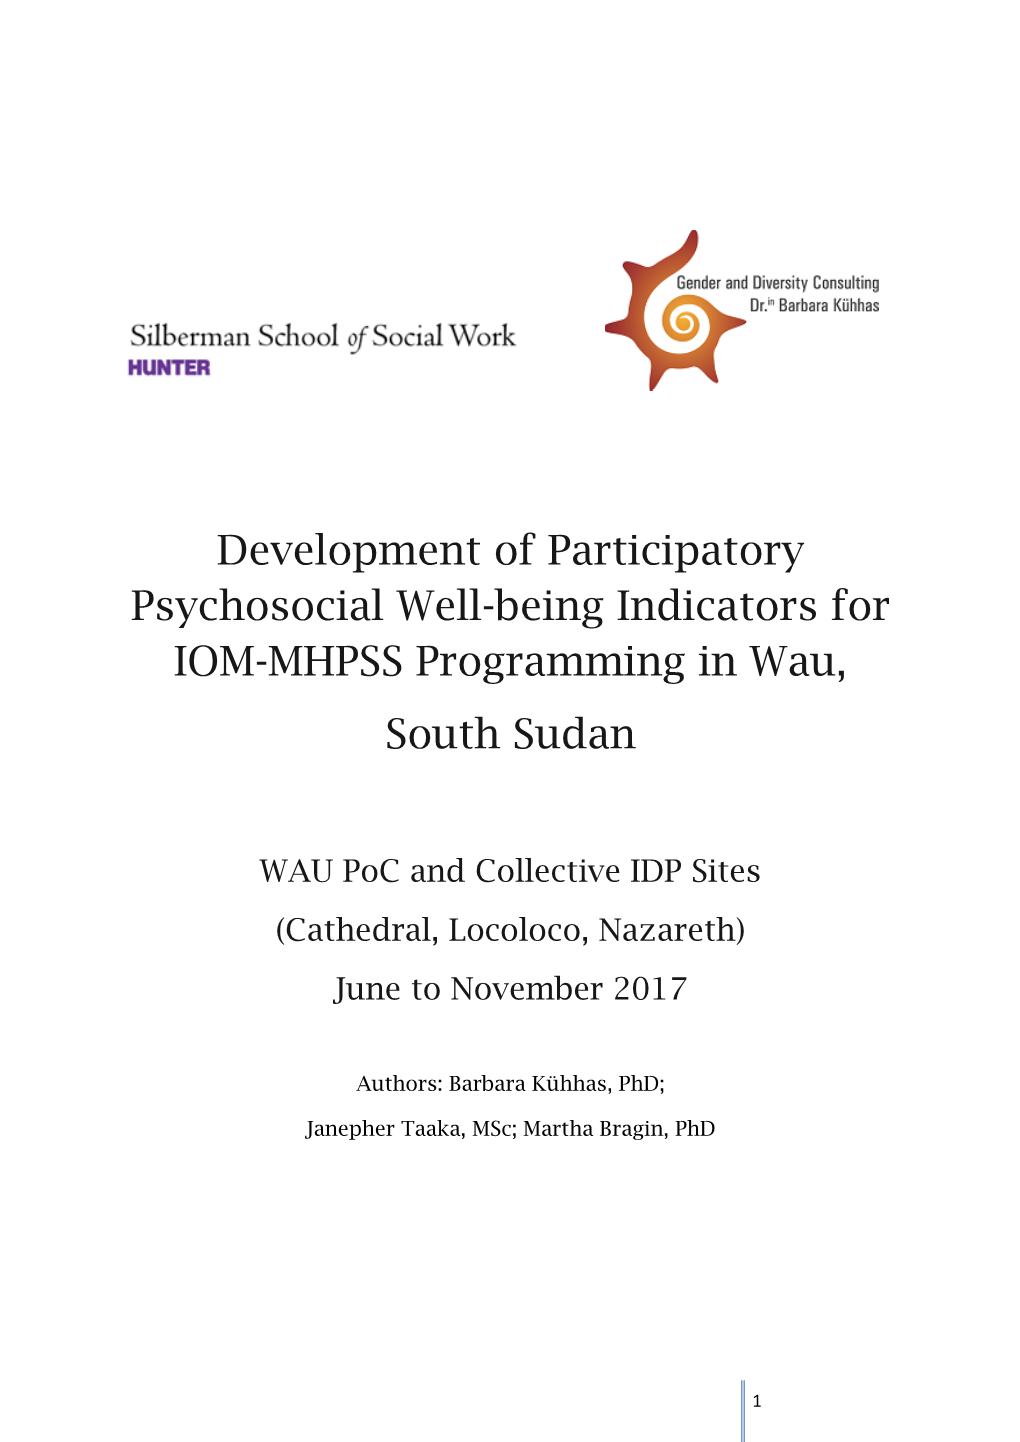 Development of Participatory Psychosocial Well-Being Indicators for IOM-MHPSS Programming in Wau, South Sudan